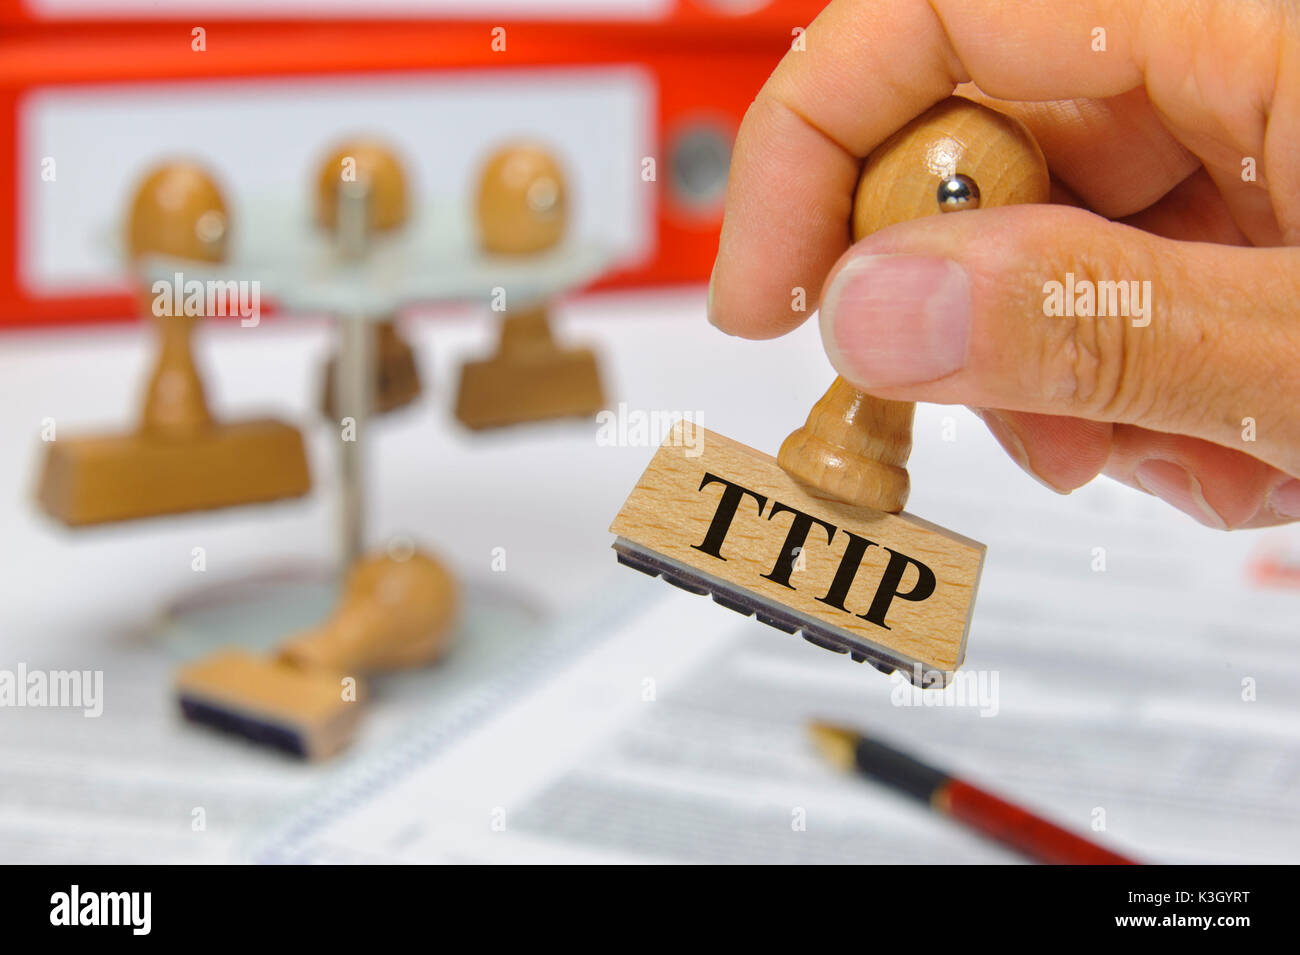 TTIP free trade agreement between the USA and the EU Stock Photo